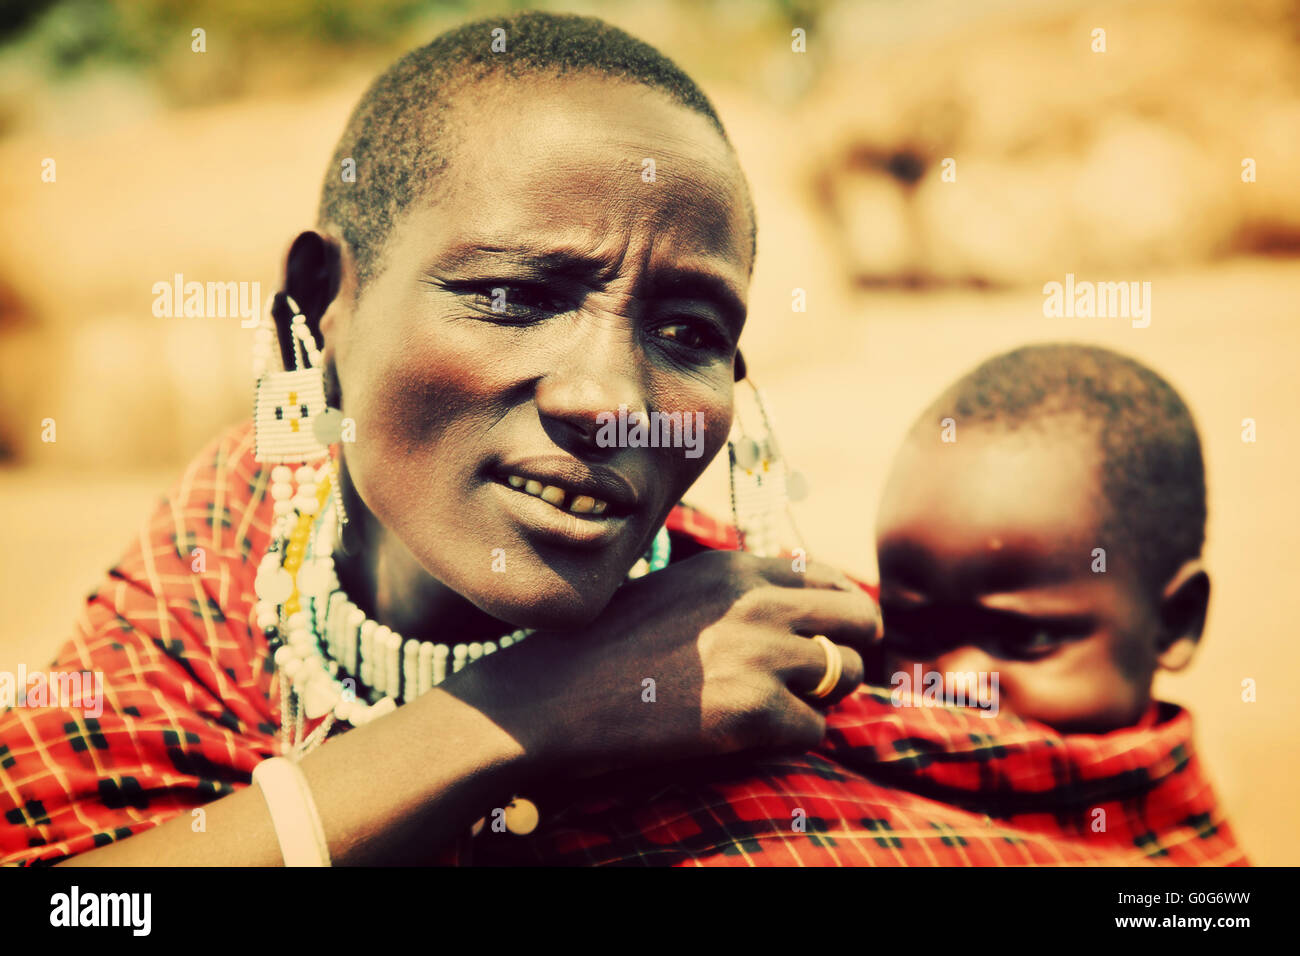 Maasai baby carried by his mother in Tanzania, Africa Stock Photo